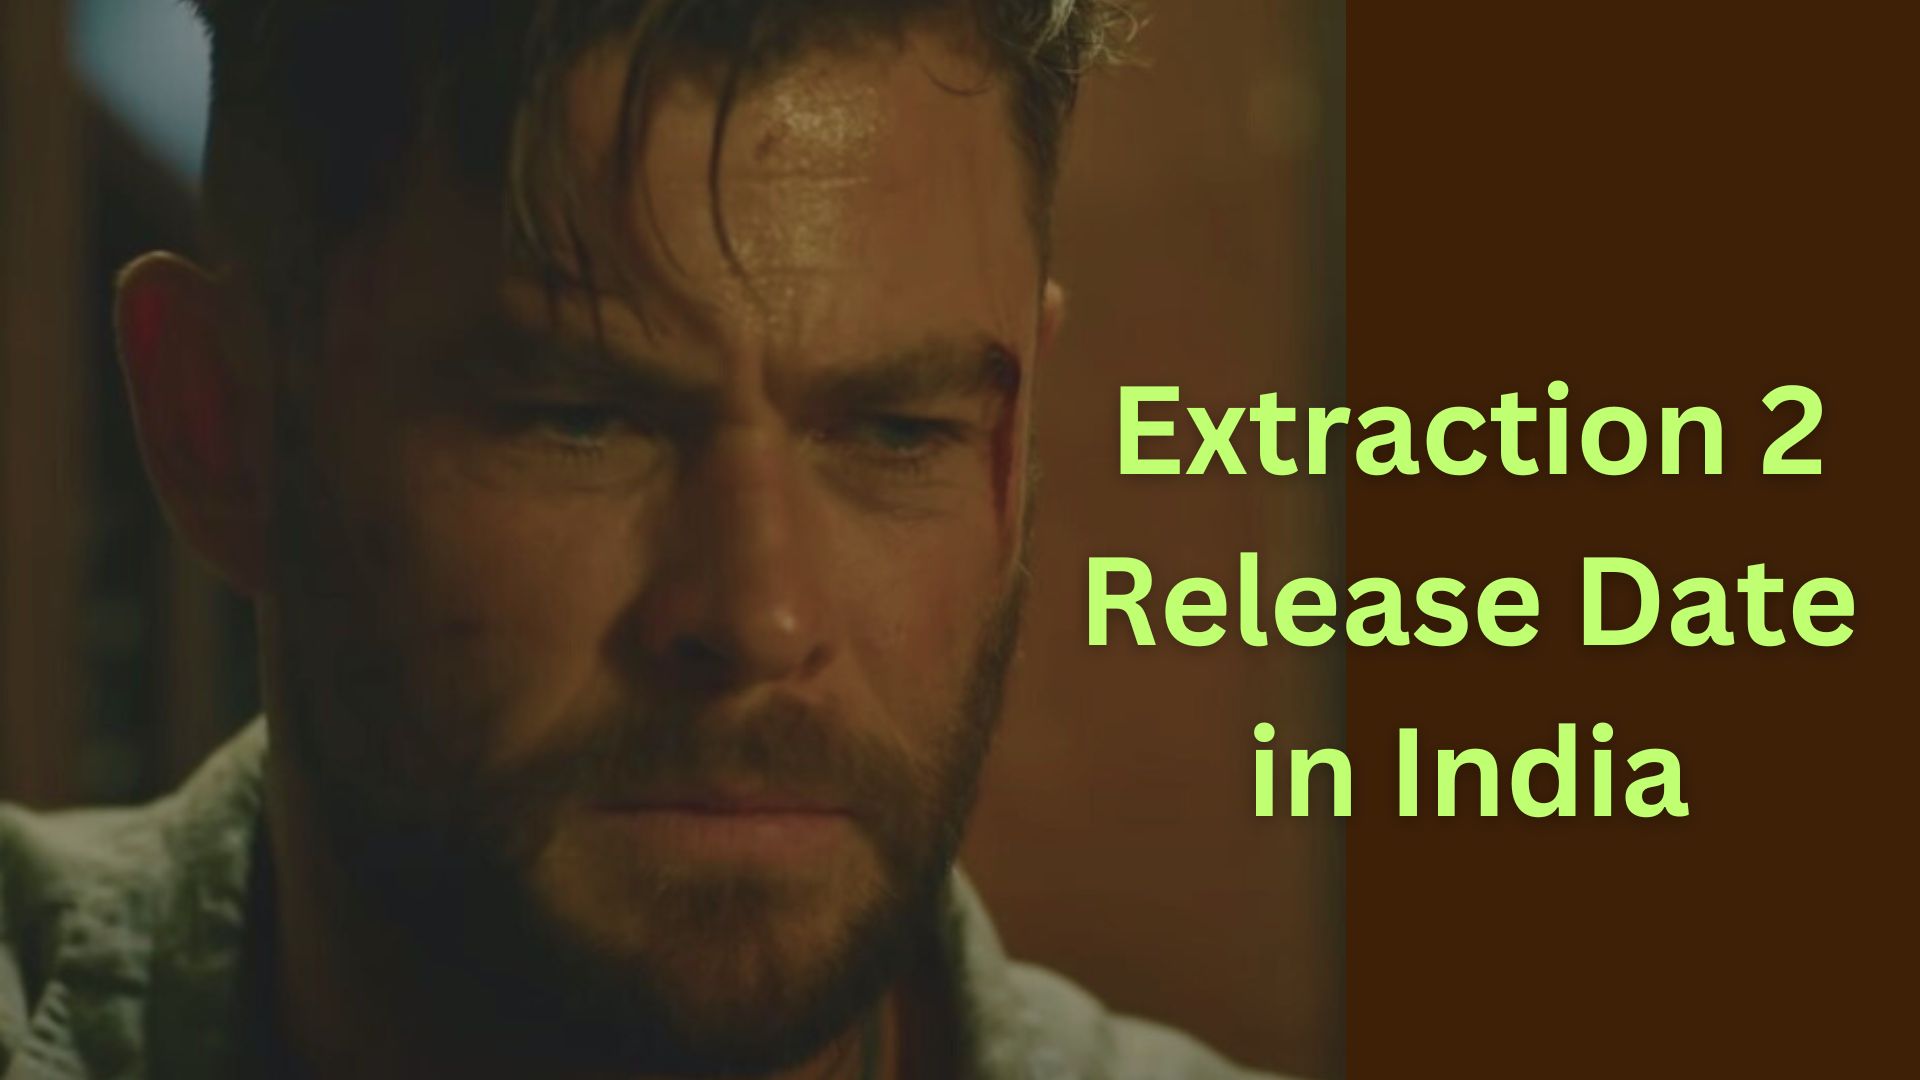 Mark Your Calendars: Extraction 2 Release Date in India Revealed!